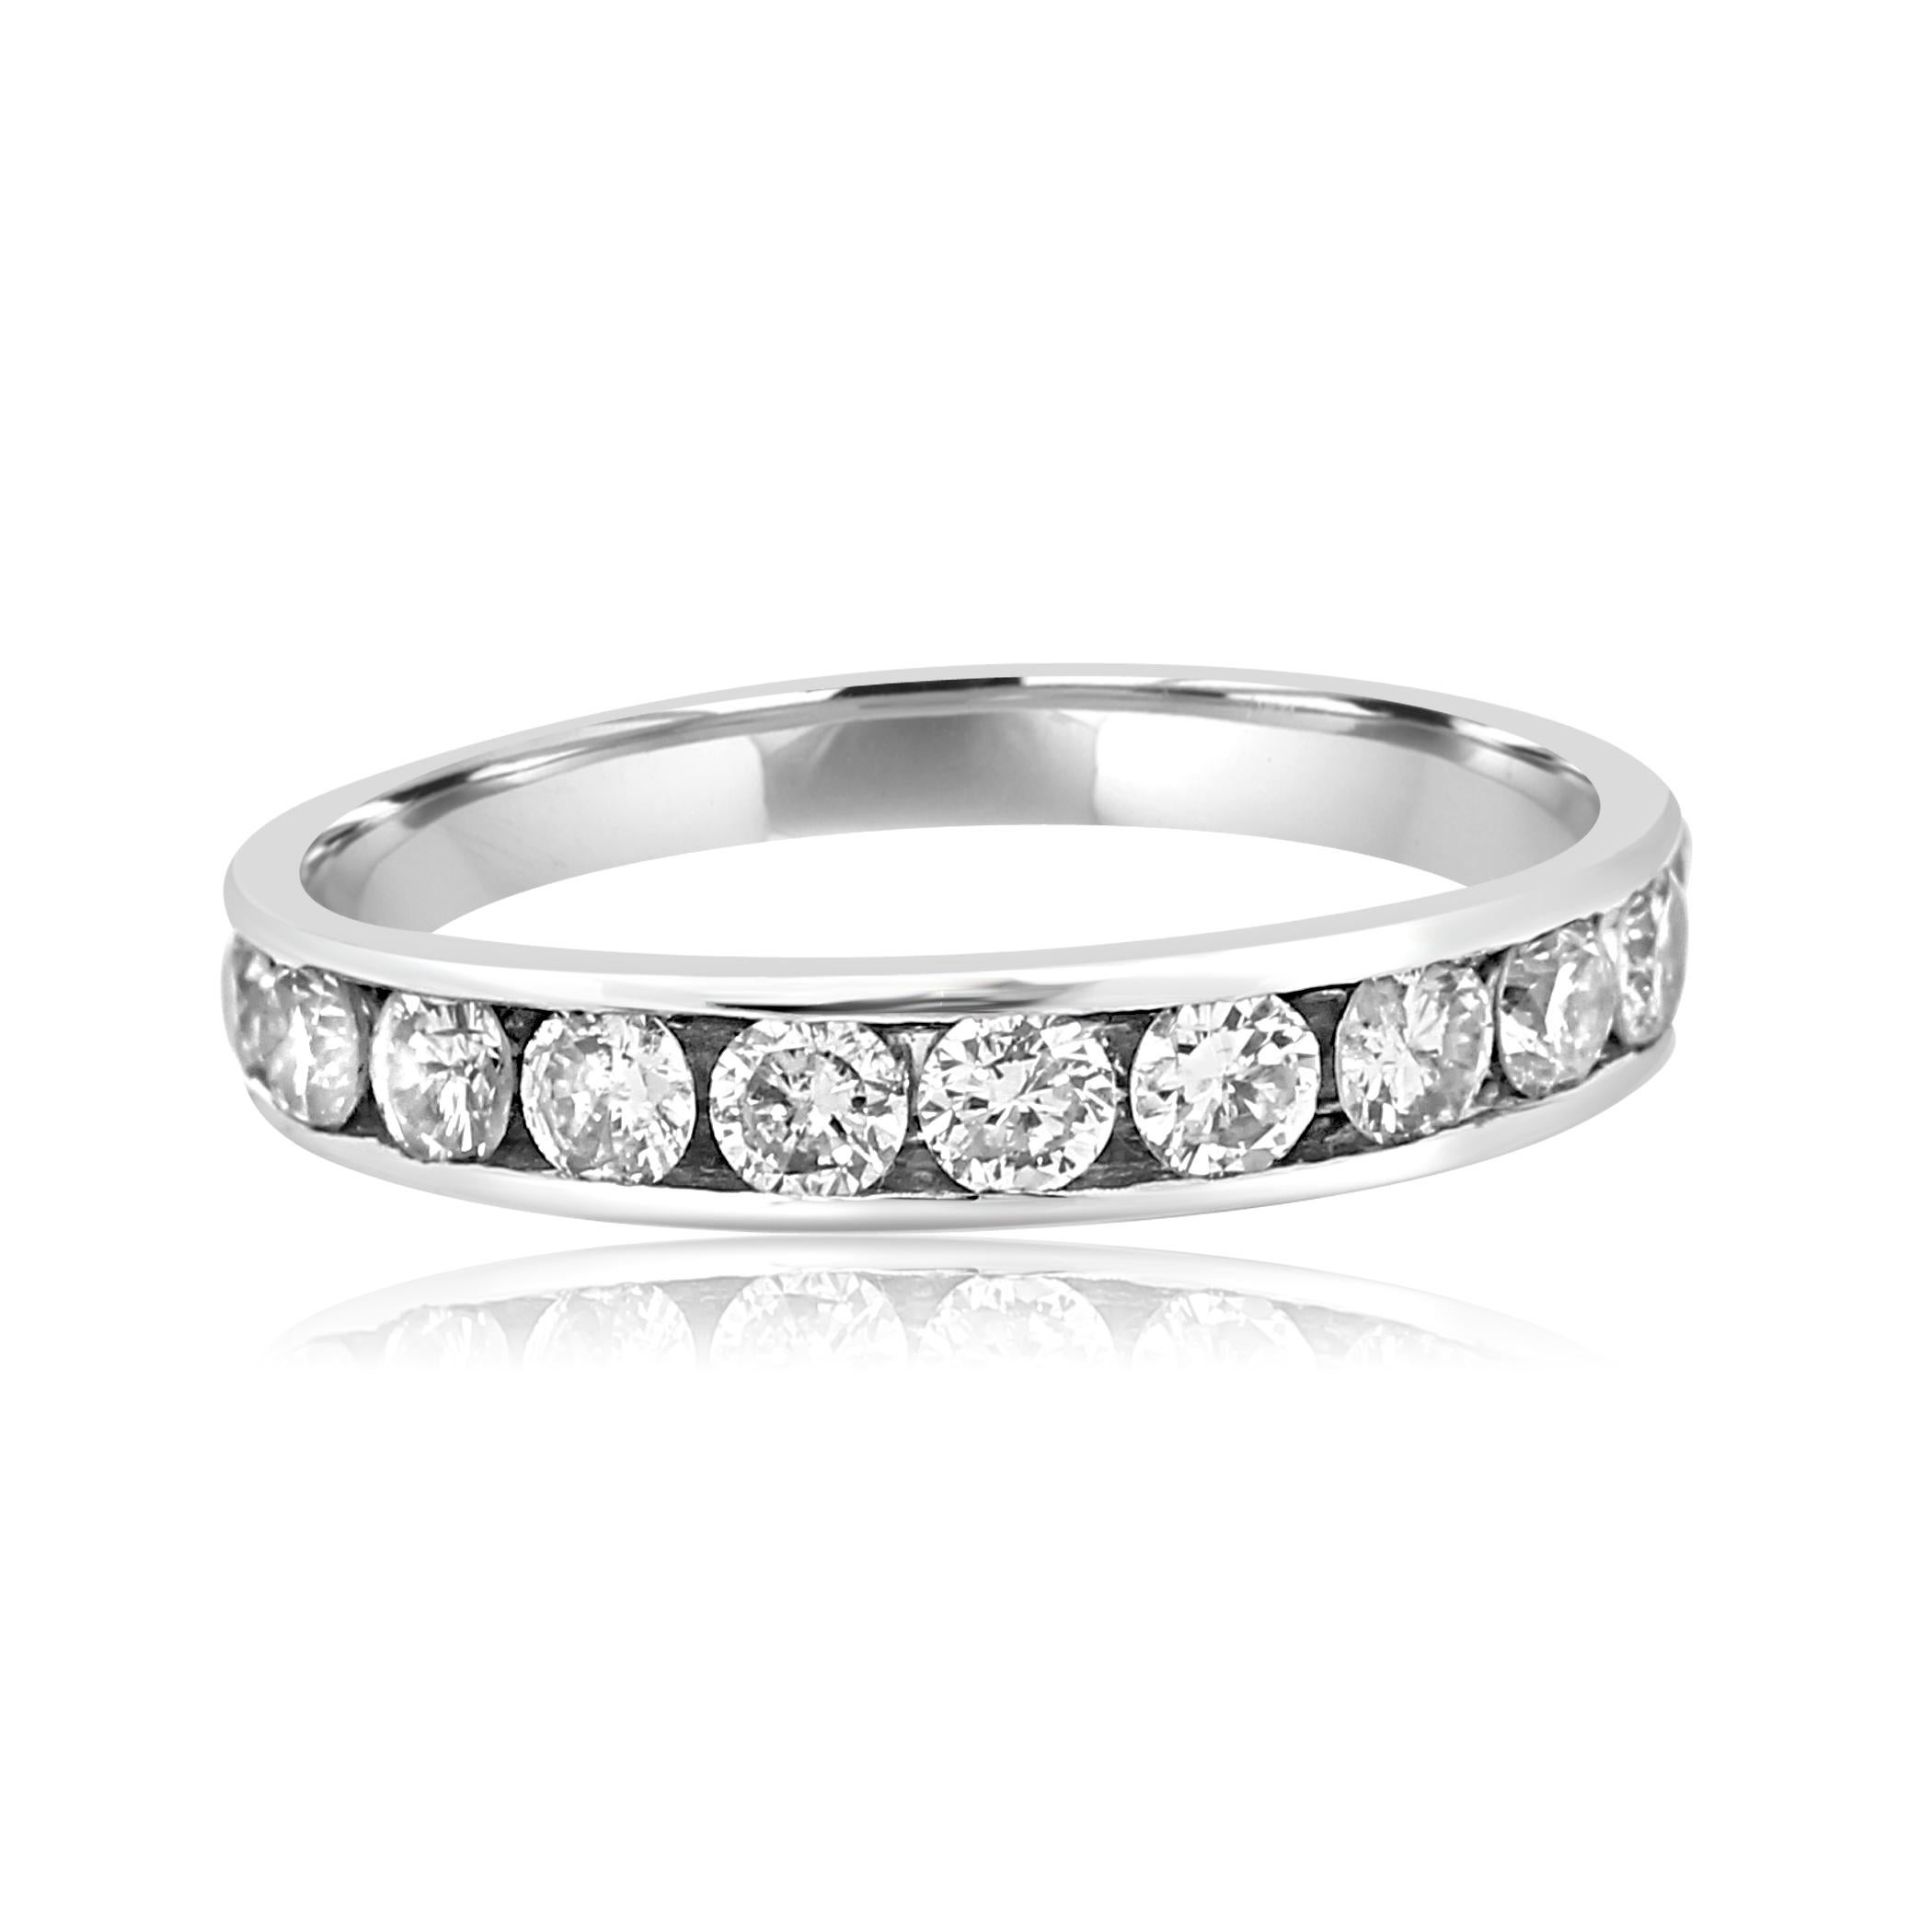 11 White G-H Color SI-I Diamond Round 0.75 Carat Channel Set in 14K White Gold Bridal Fashion Cocktail Band Ring.

Style available in different price ranges. Prices are based on your selection of 4C's i.e Cut, Color, Carat, Clarity. Please contact